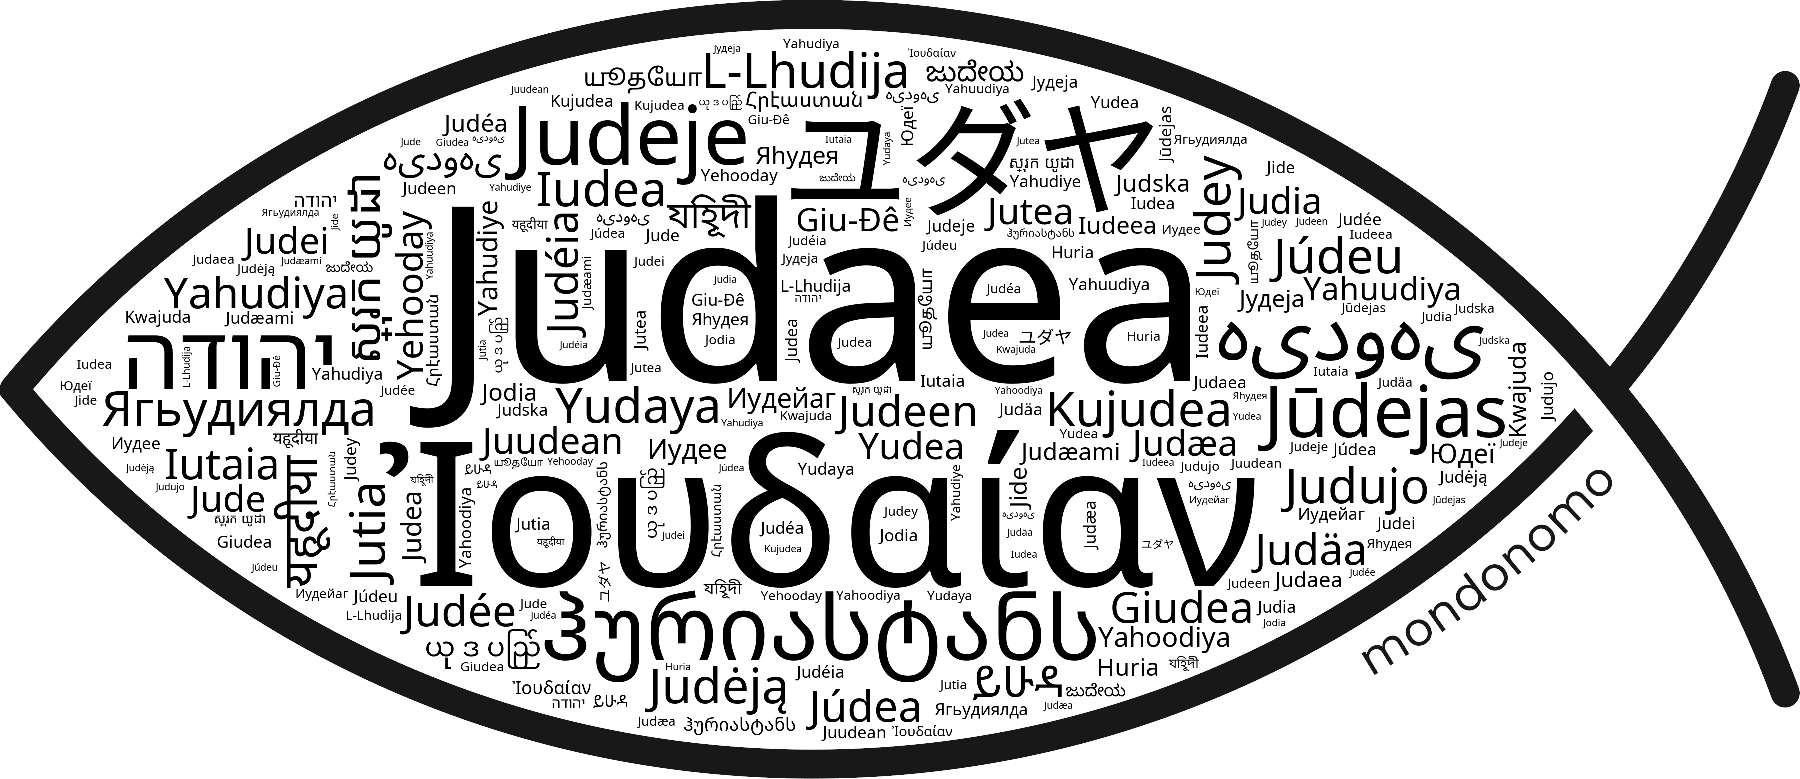 Name Judaea in the world's Bibles